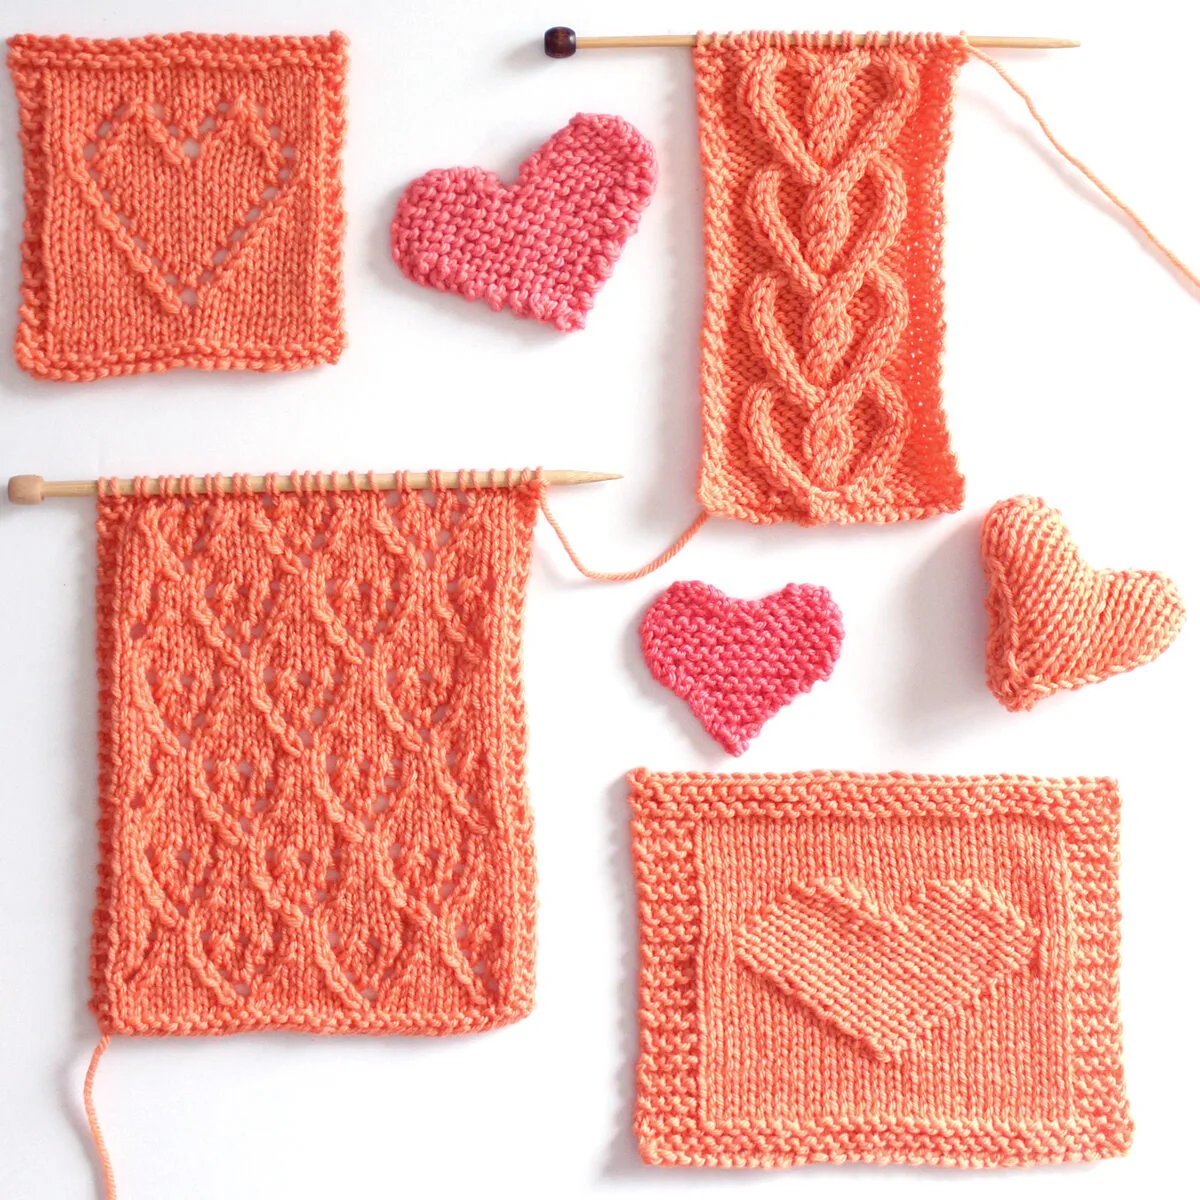 9 Heart Knitting Patterns for All Levels - Studio Knit